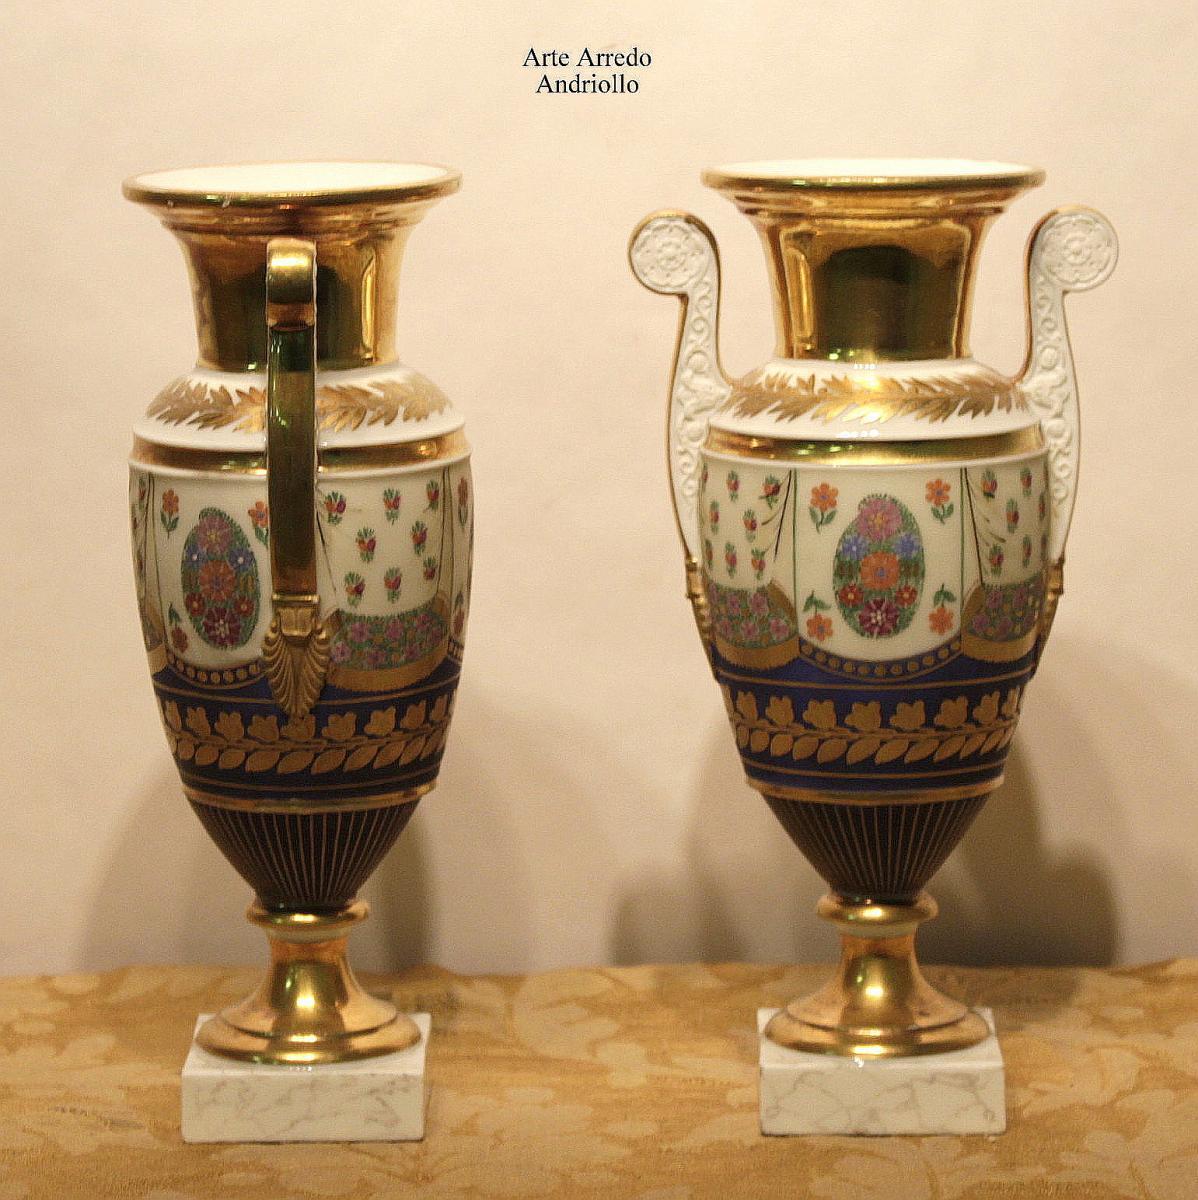 19th Century Empire Vases in Ceramic with Polychrome and Gold Decorations (Spätes 19. Jahrhundert)